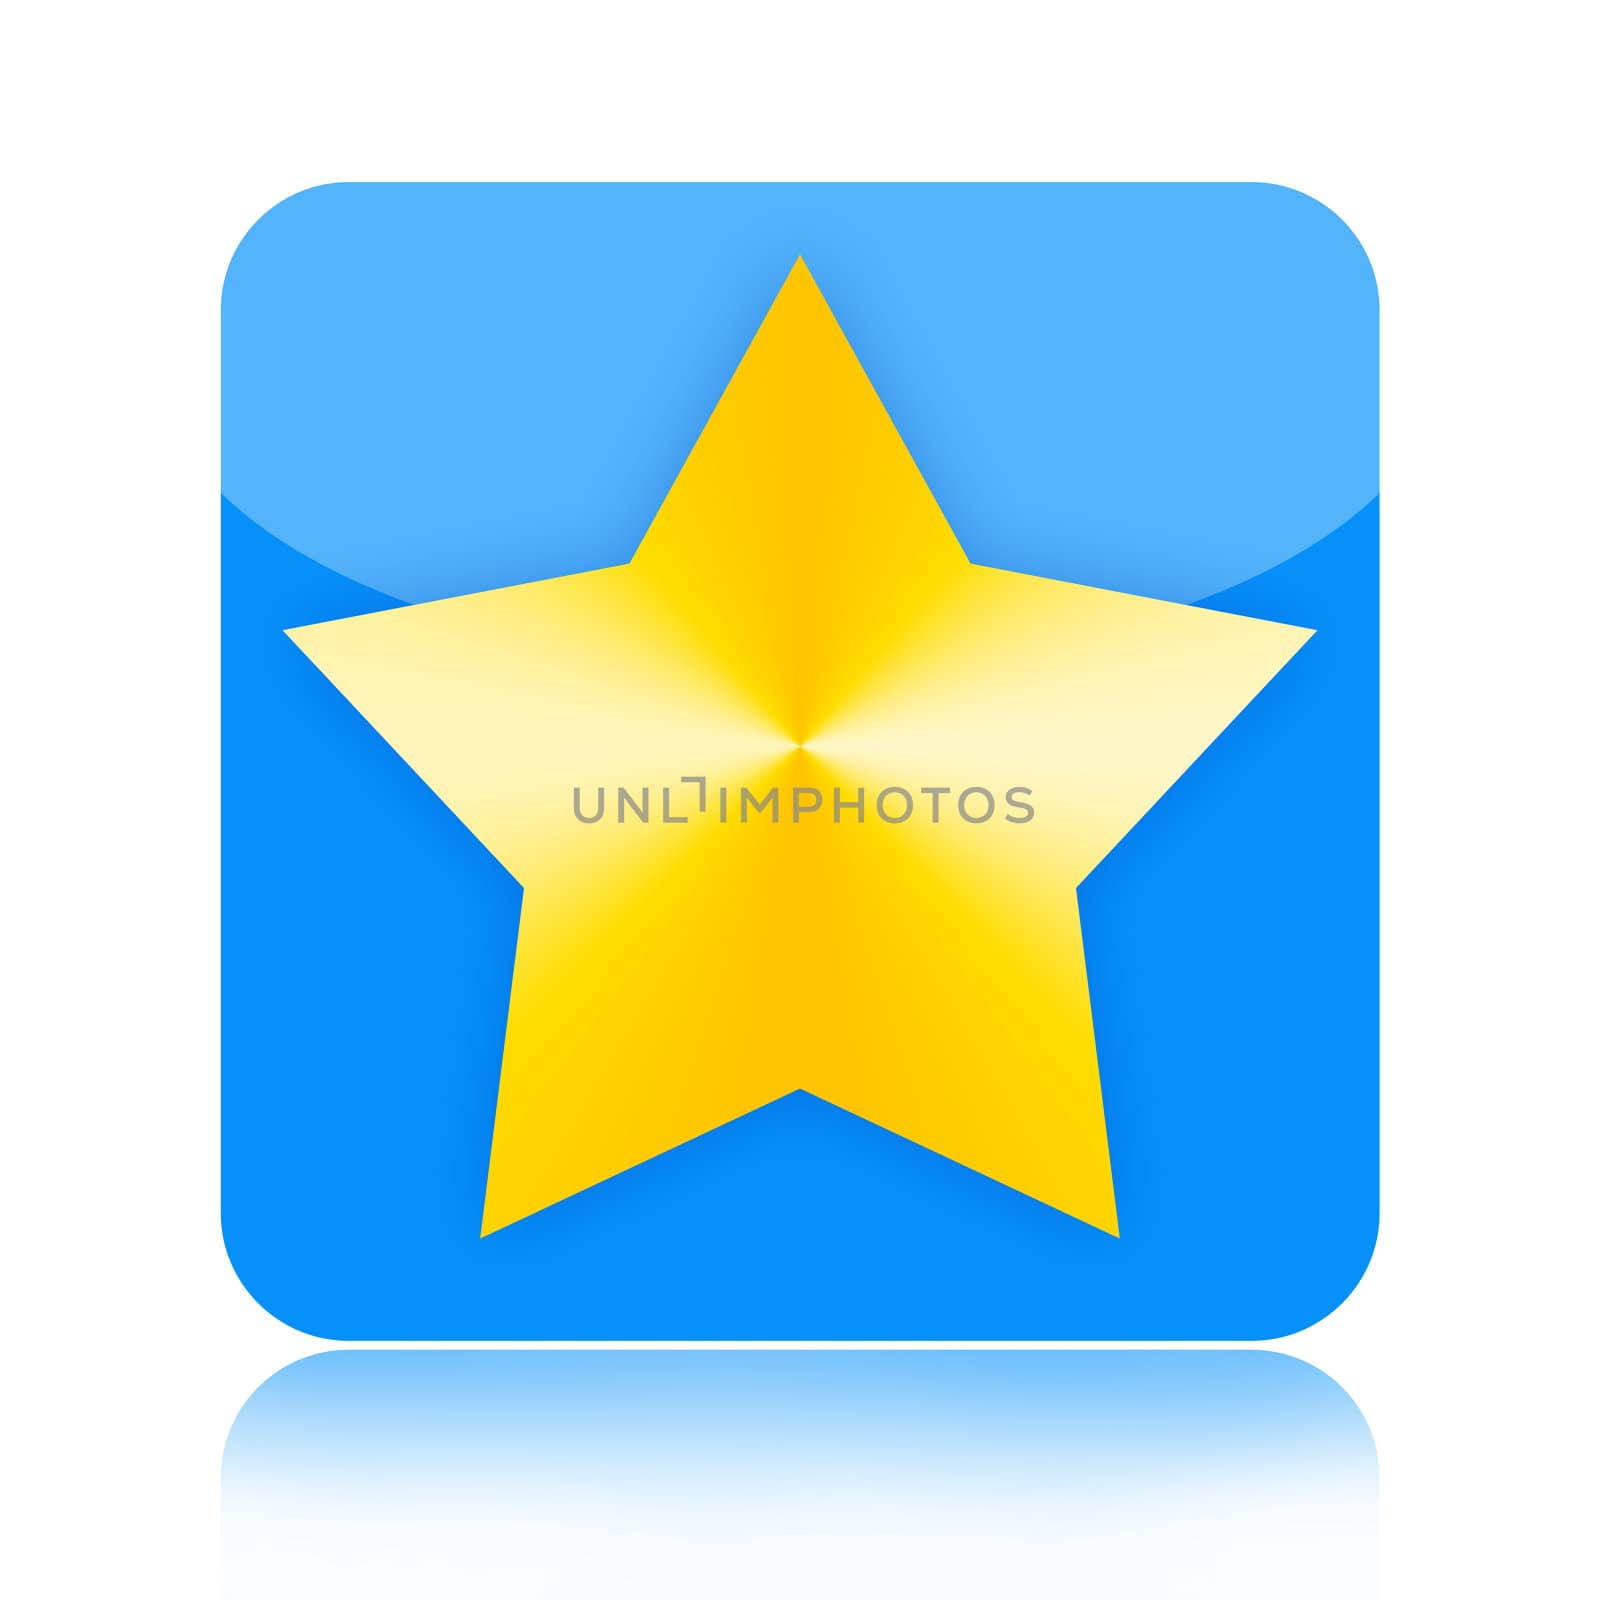 Golden star icon isolated on white background